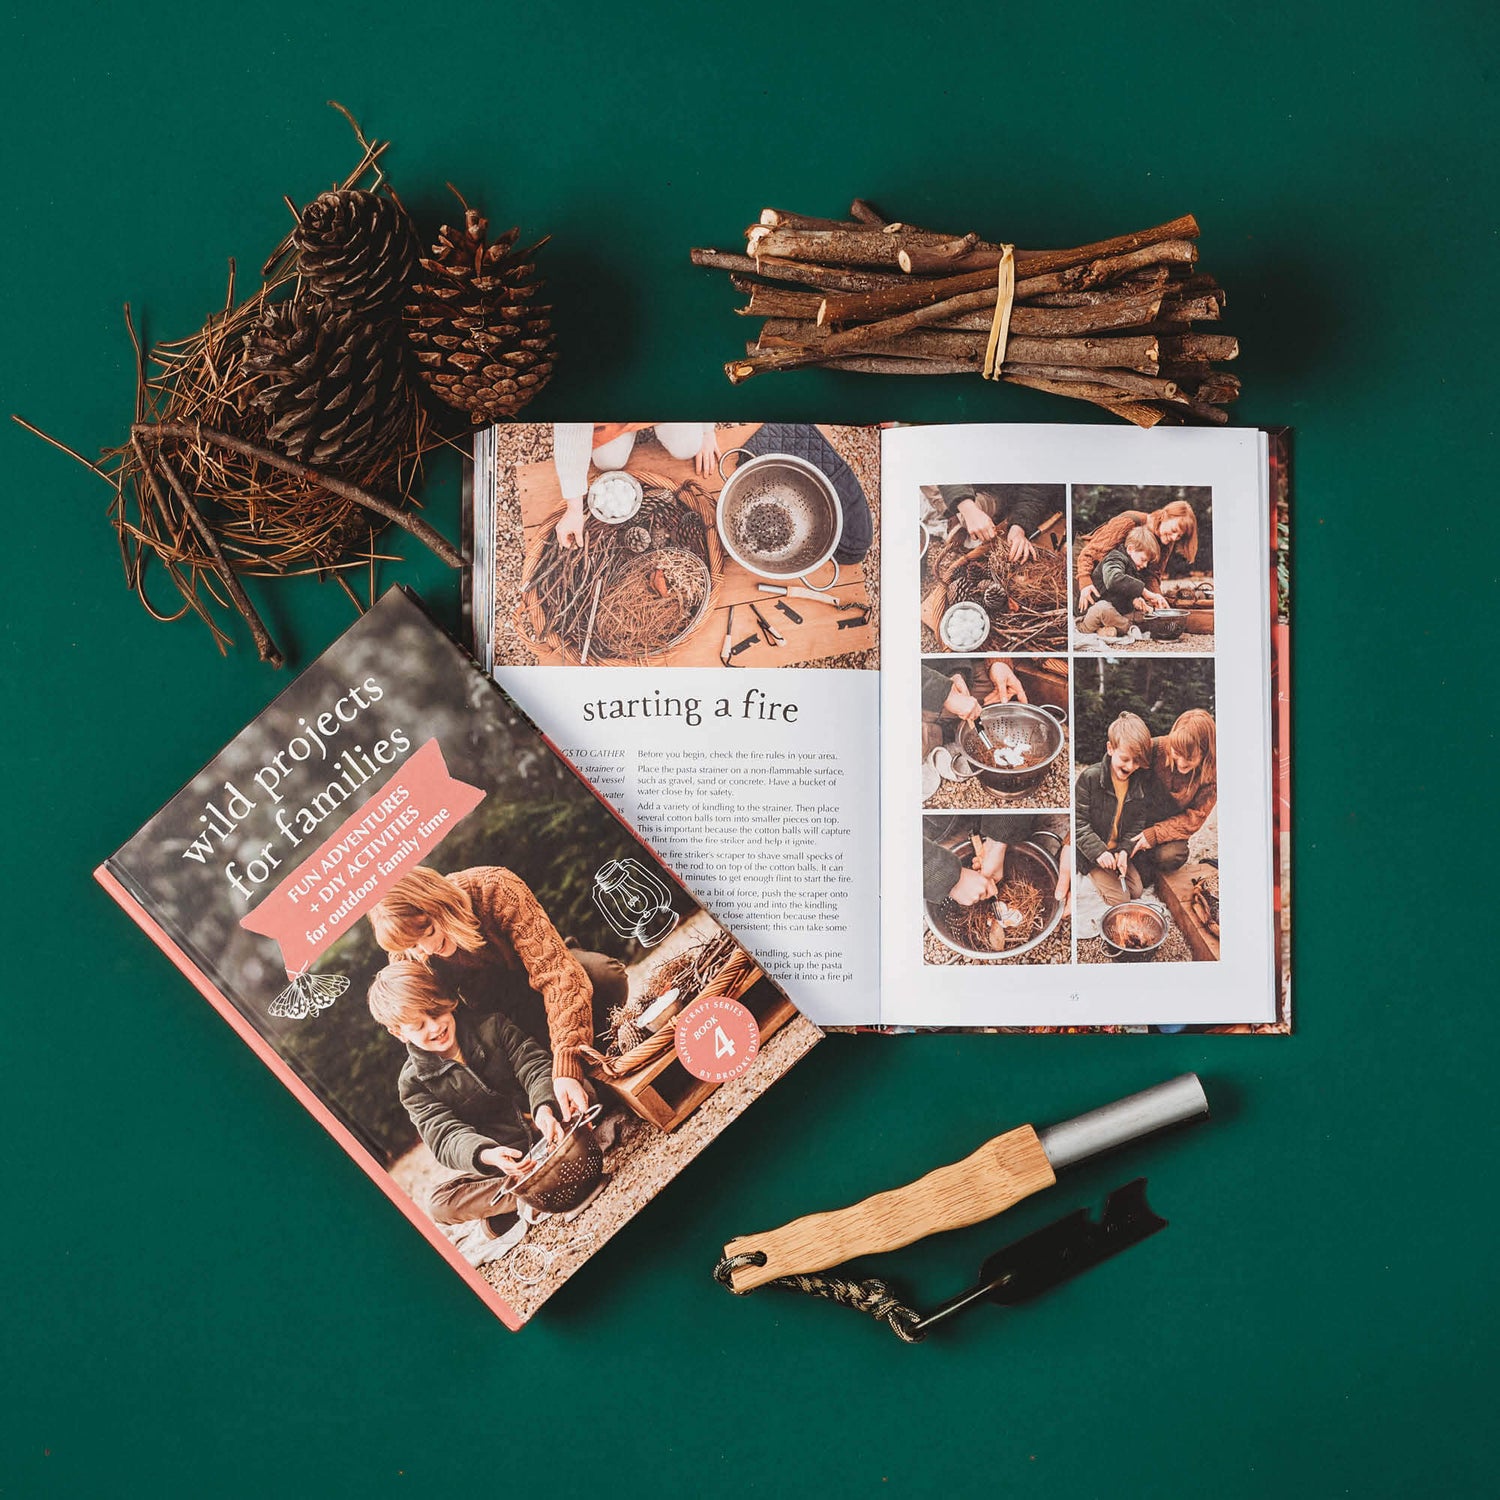 Pages showing step by step instructions for how to start a fire from scratch with kids from Wild Projects for Families book has fun adventures and DIY activities for family outdoor time, is made in Australia by Your Wild Books.